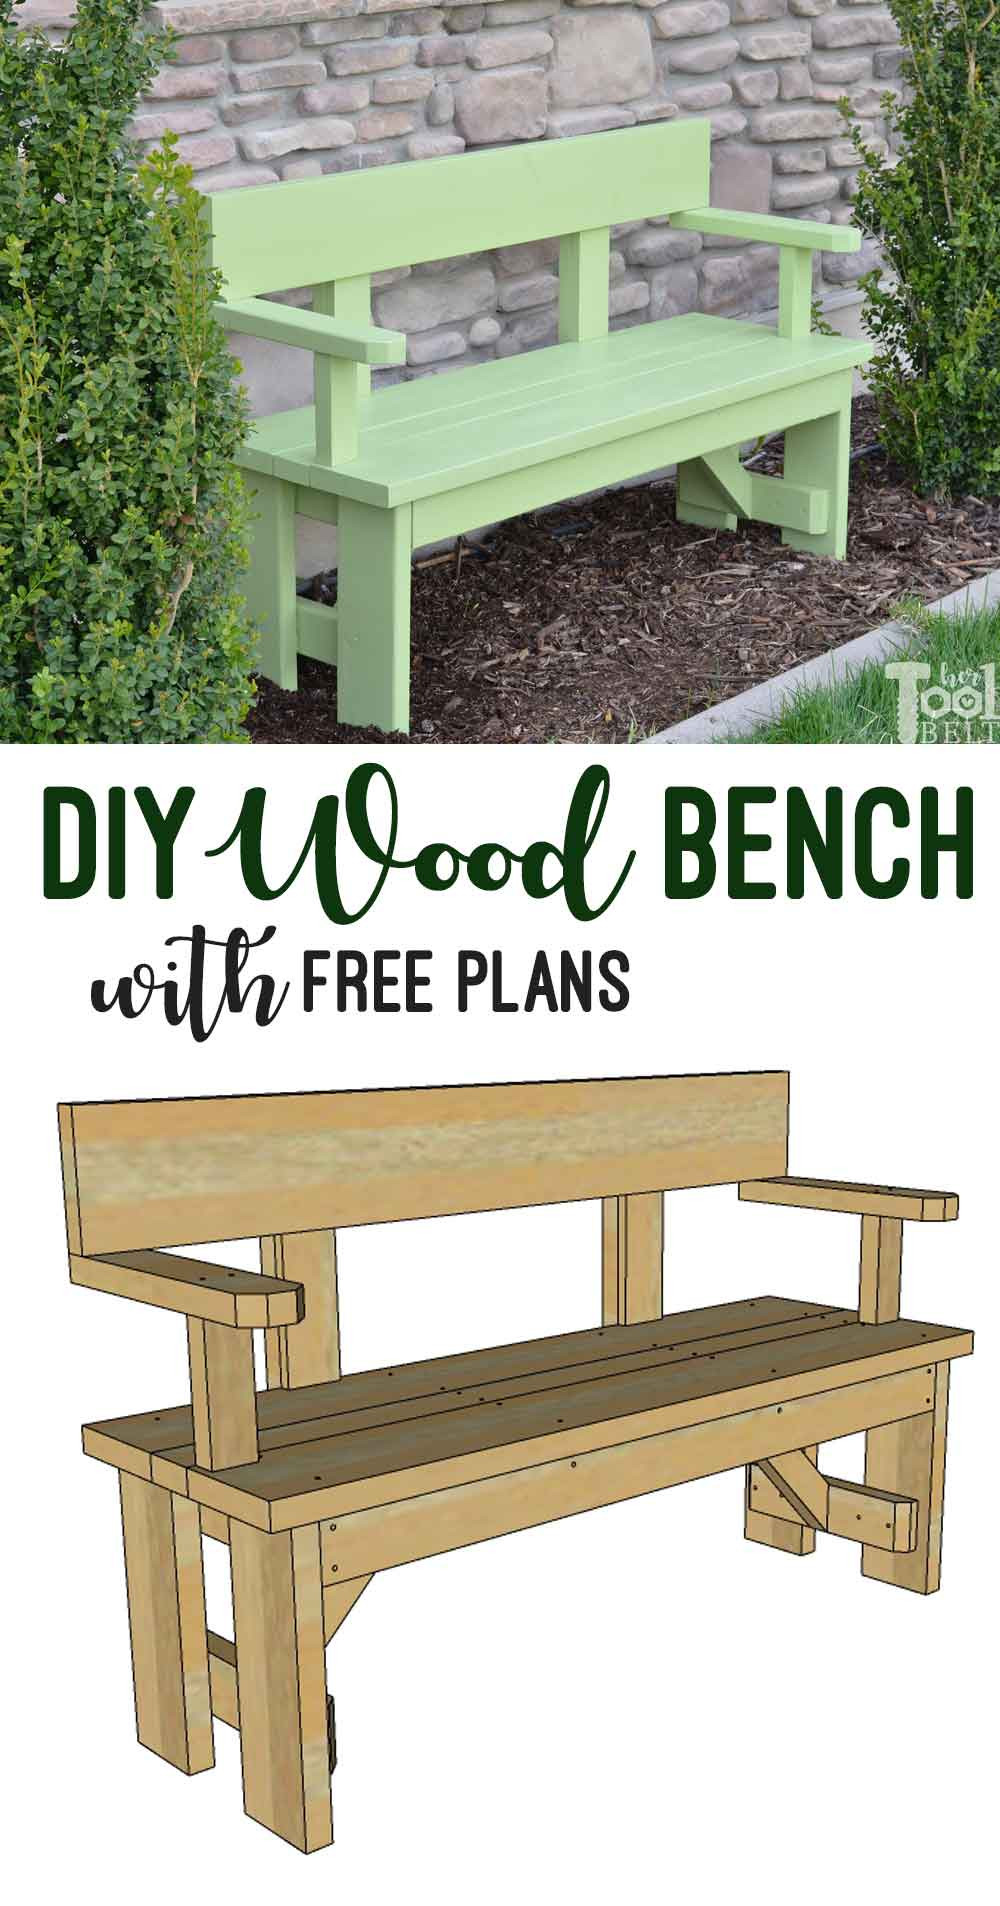 DIY Outdoor Wood Bench
 DIY Wood Bench with Back Plans Her Tool Belt